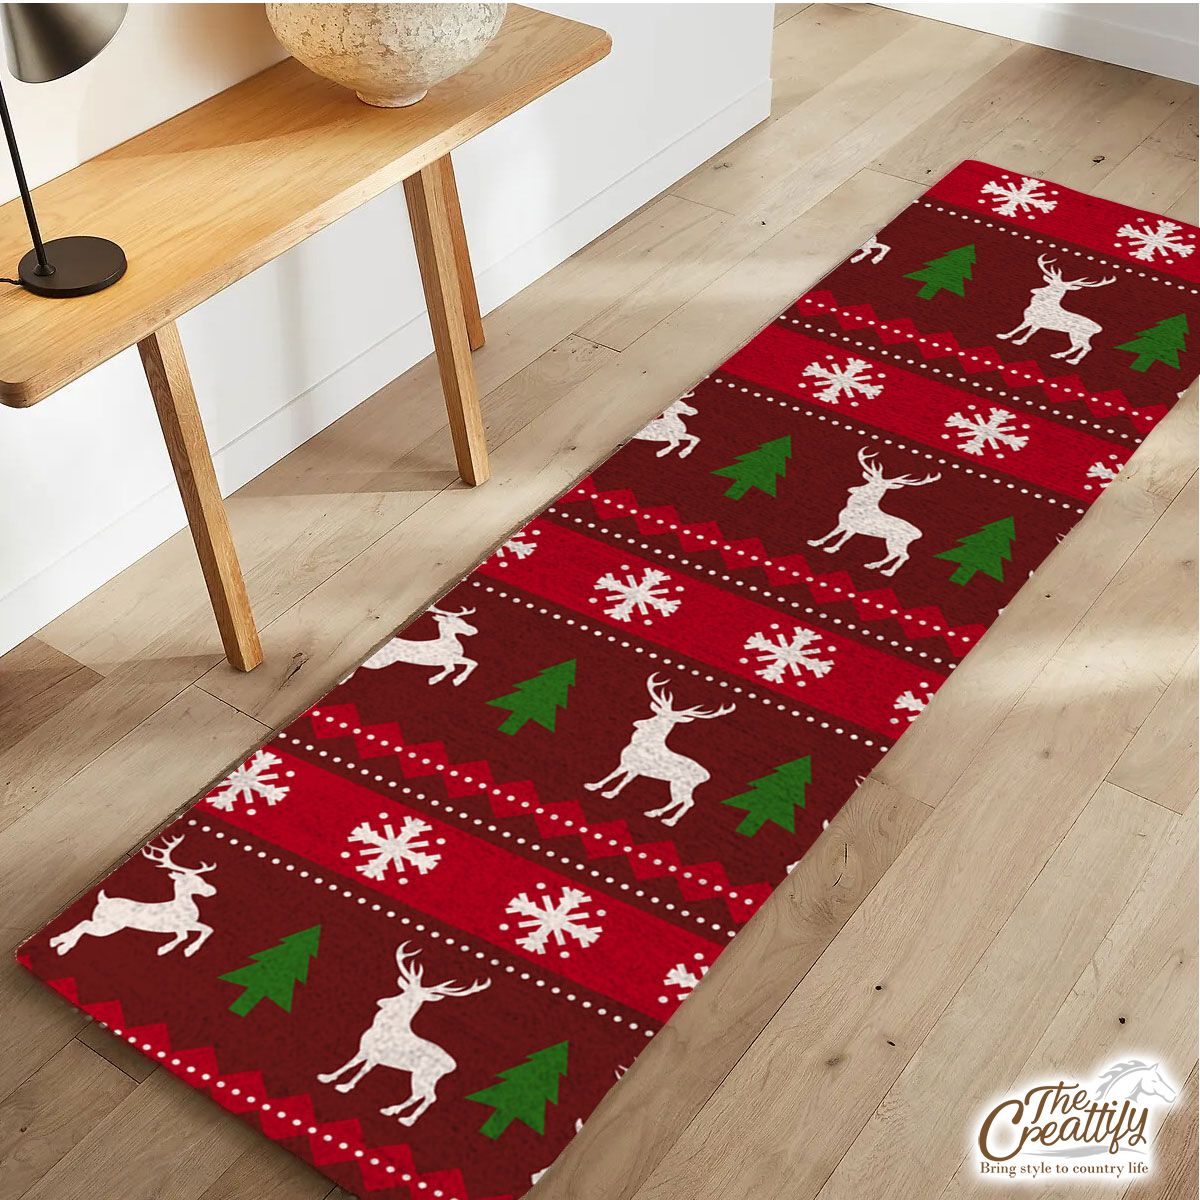 Red Green And White Christmas Tree, Reindeer With Snowflake Runner Carpet